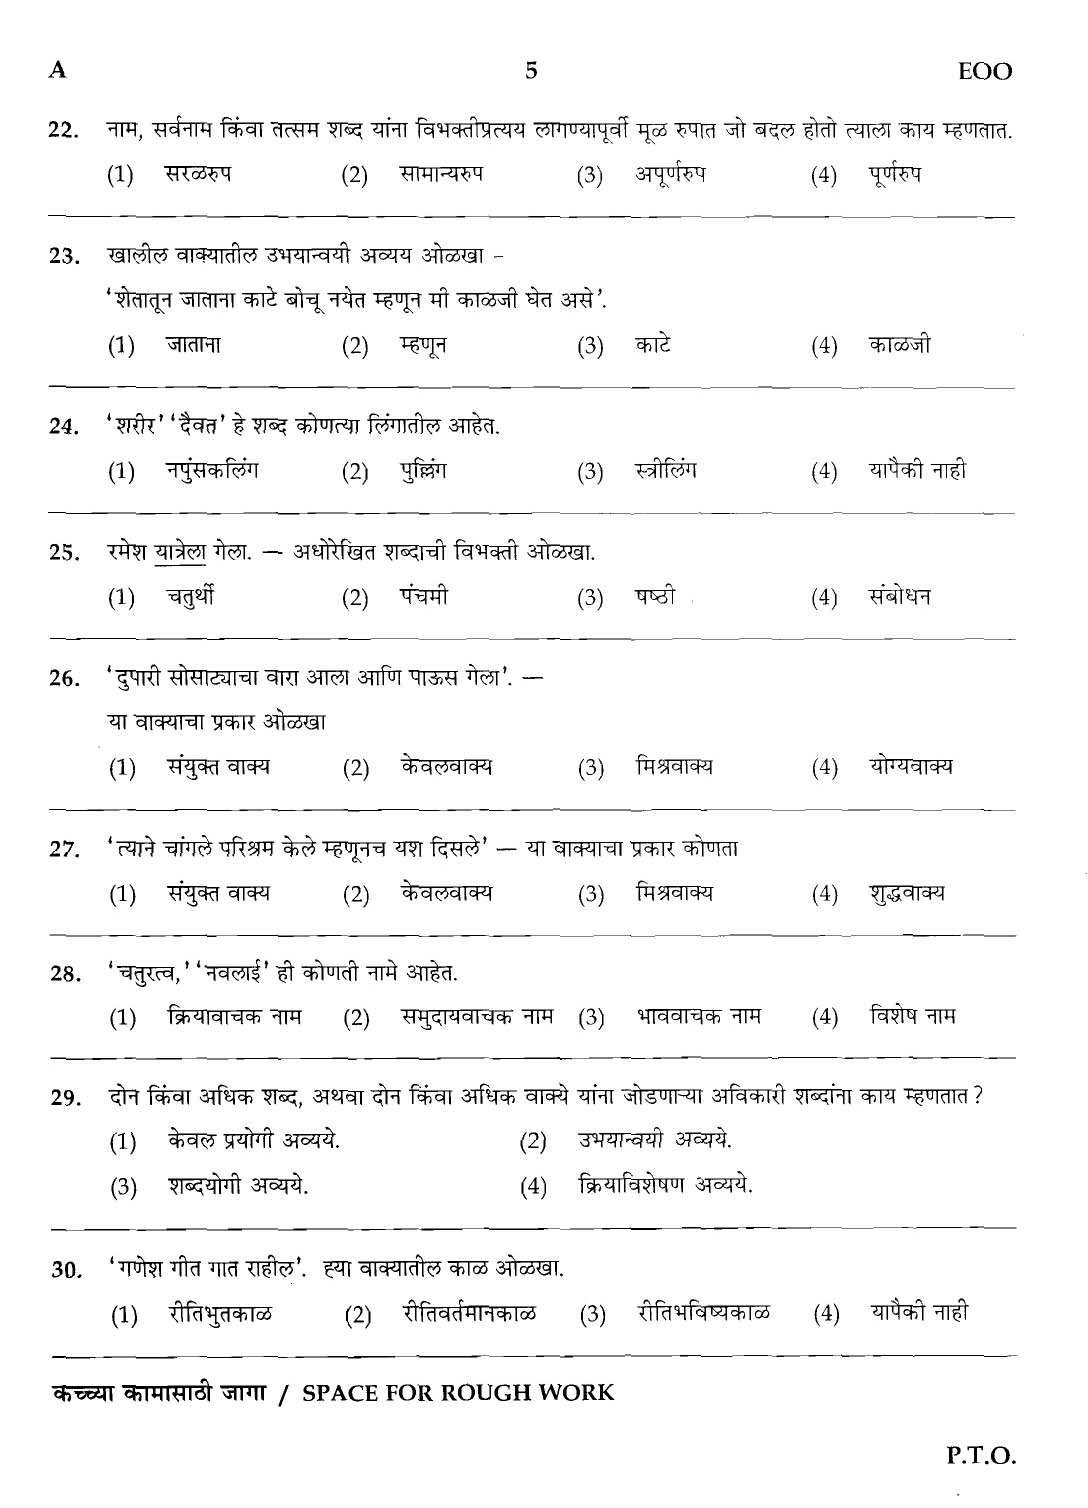 MPSC Agricultural Services Preliminary Exam 2012 Question Paper 4